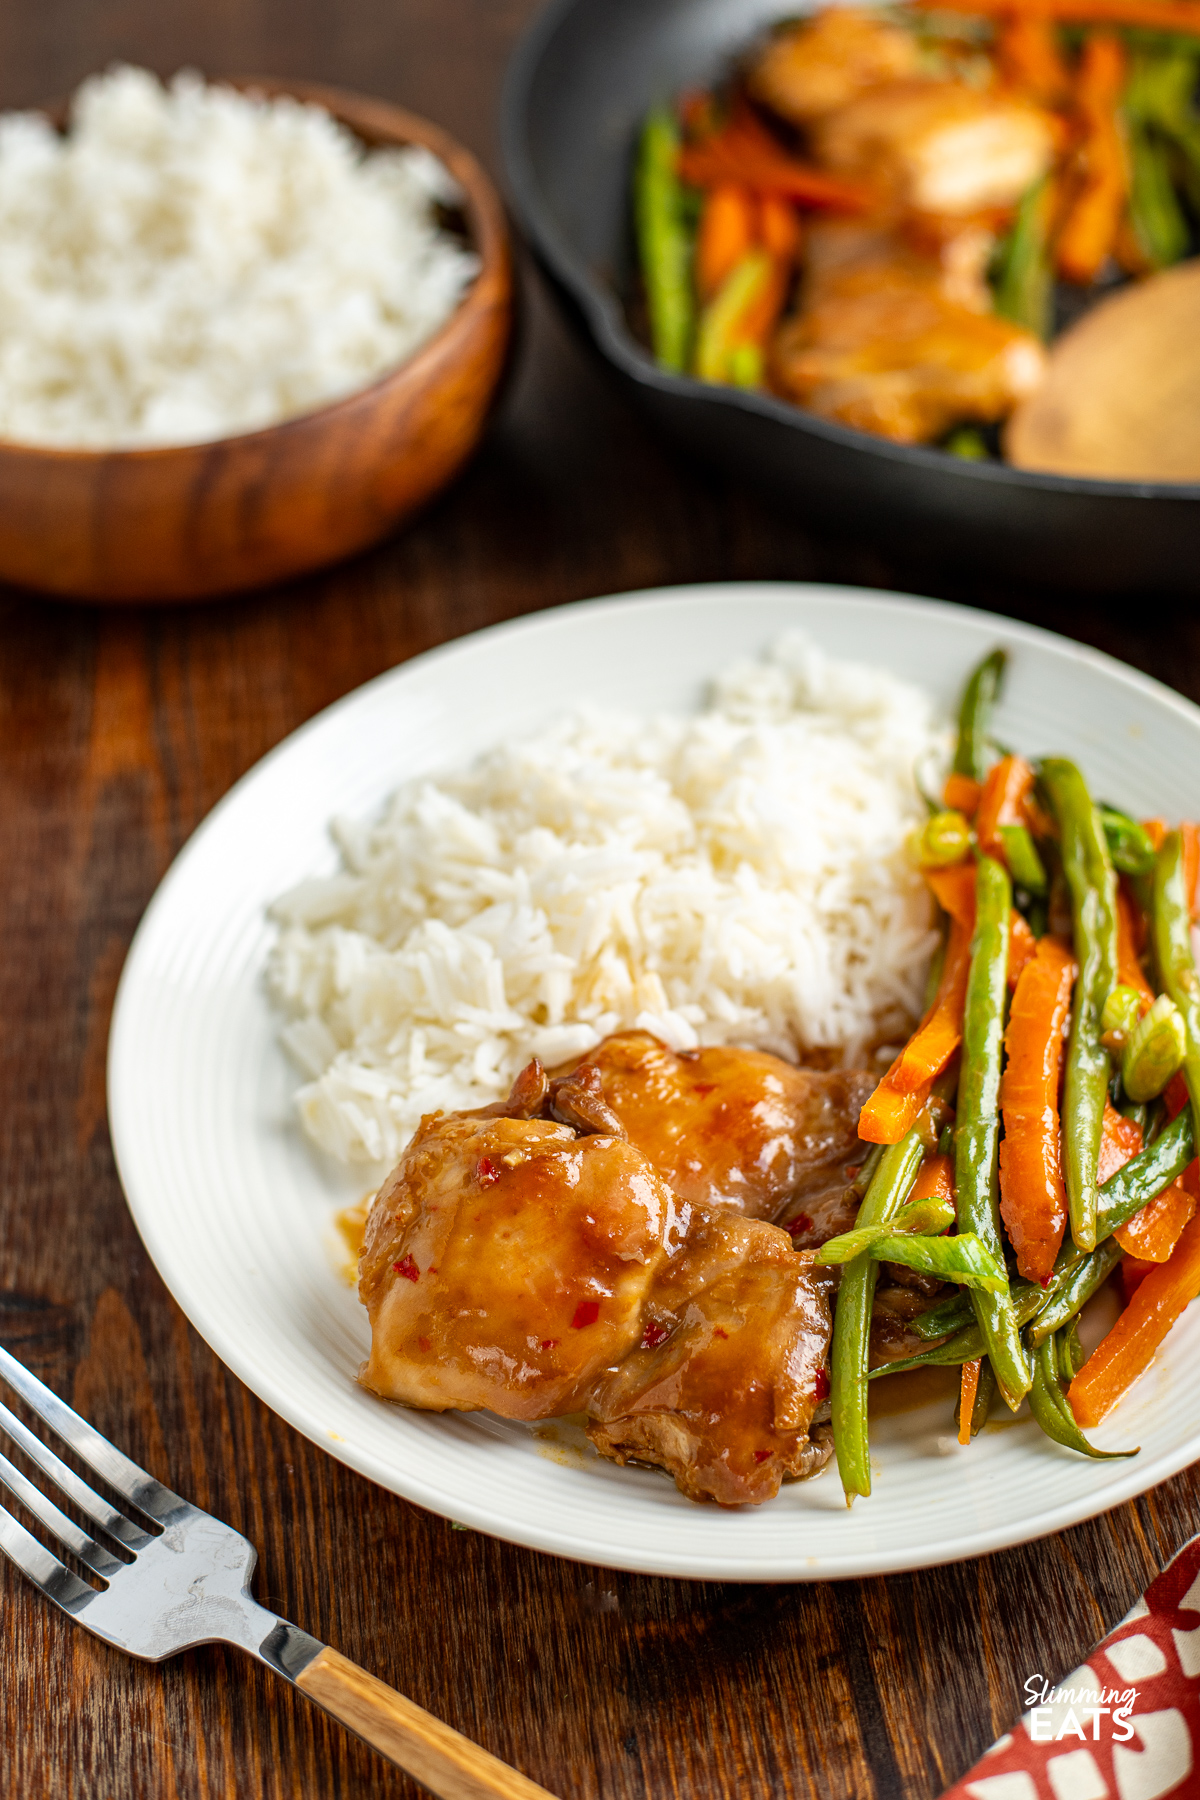 Tender chicken thighs, crisp green beans, and vibrant carrots coated in a delectable Thai sweet chili sauce, presented on a clean white plate next to a mound of aromatic jasmine rice. A silver fork rests to the left, eagerly anticipating the culinary adventure ahead.